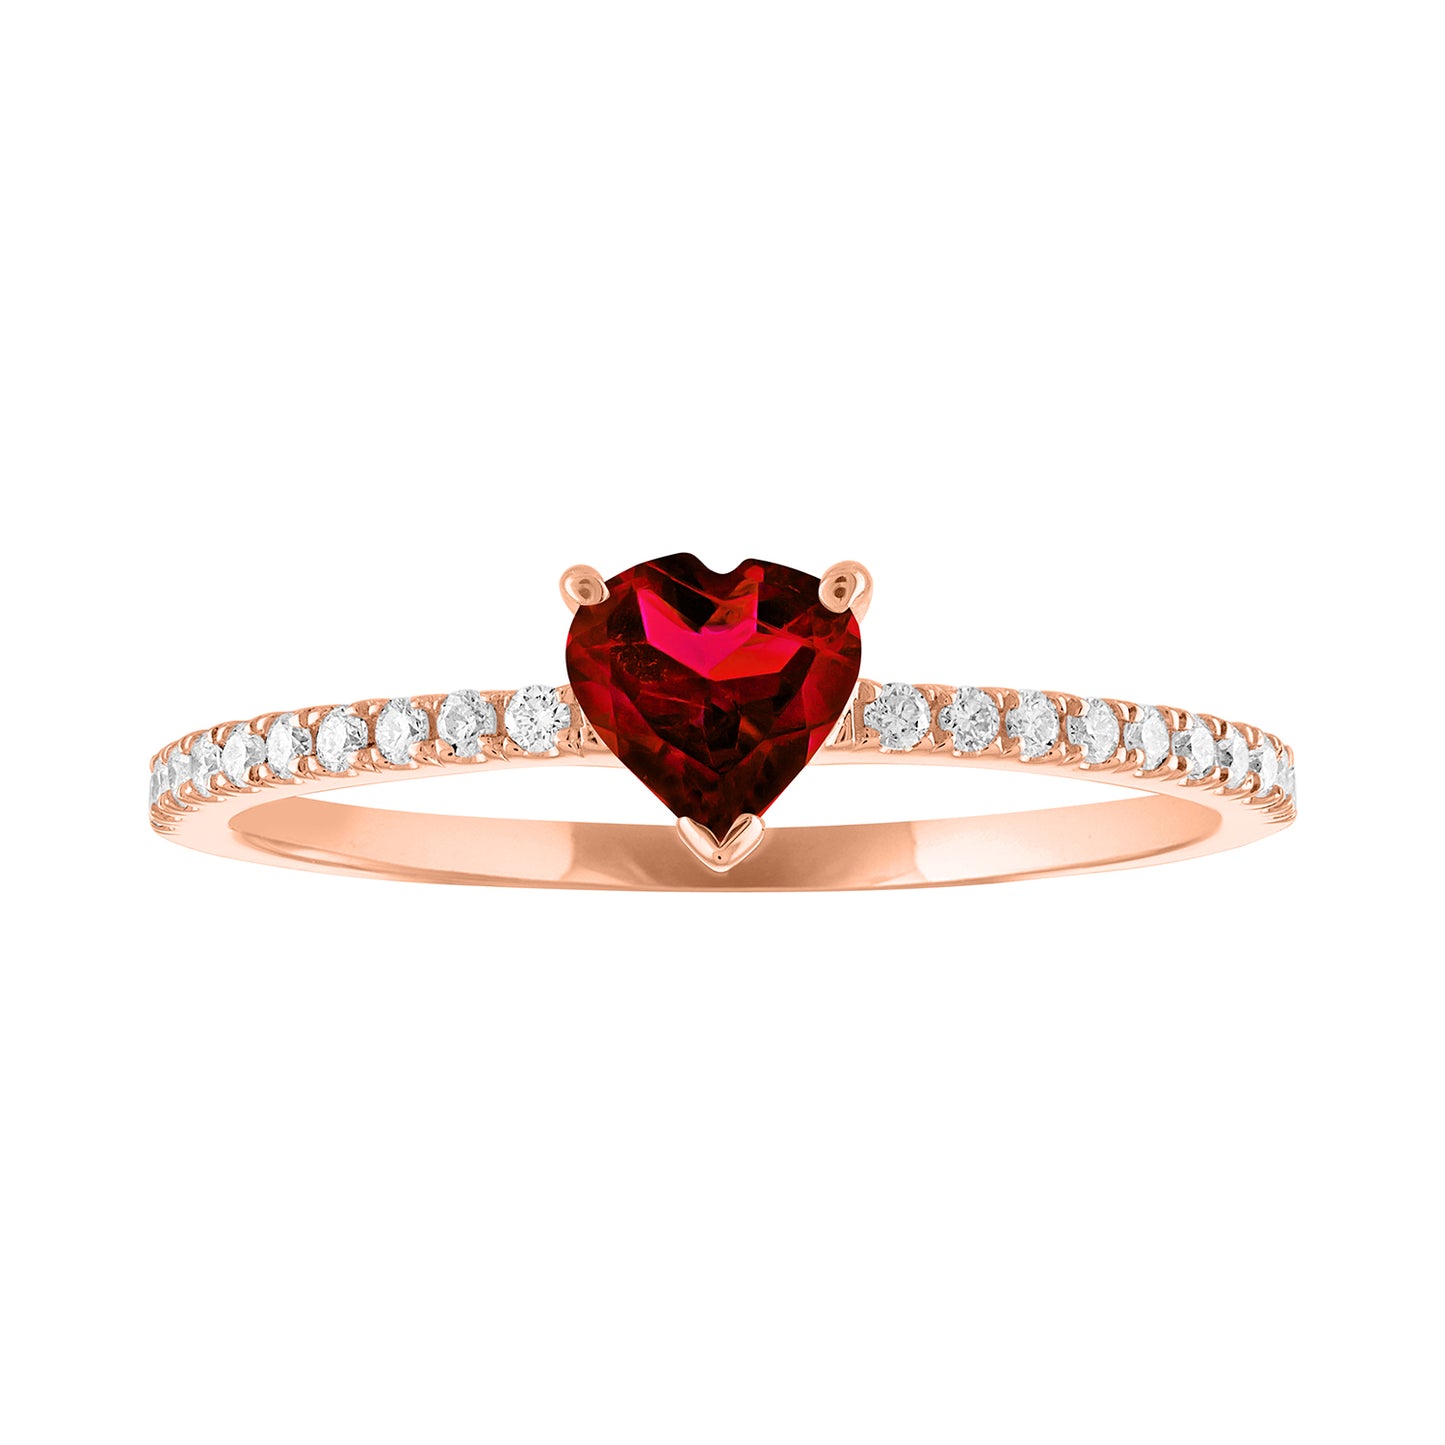 Thin banned rose gold ring with heart shaped ruby and round diamonds on the shank